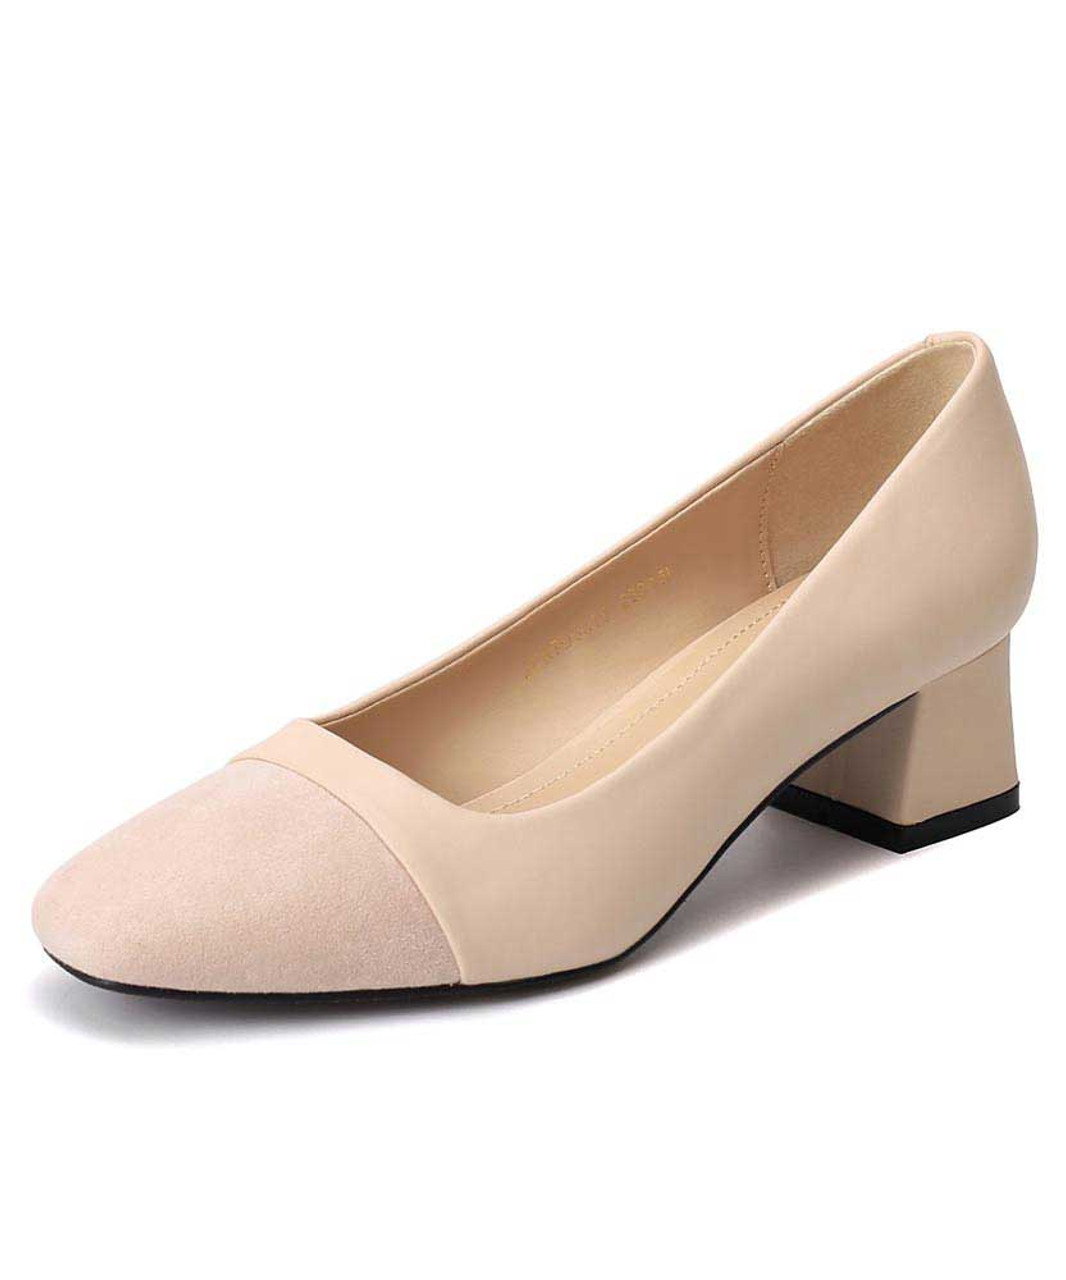 suede dress shoes womens